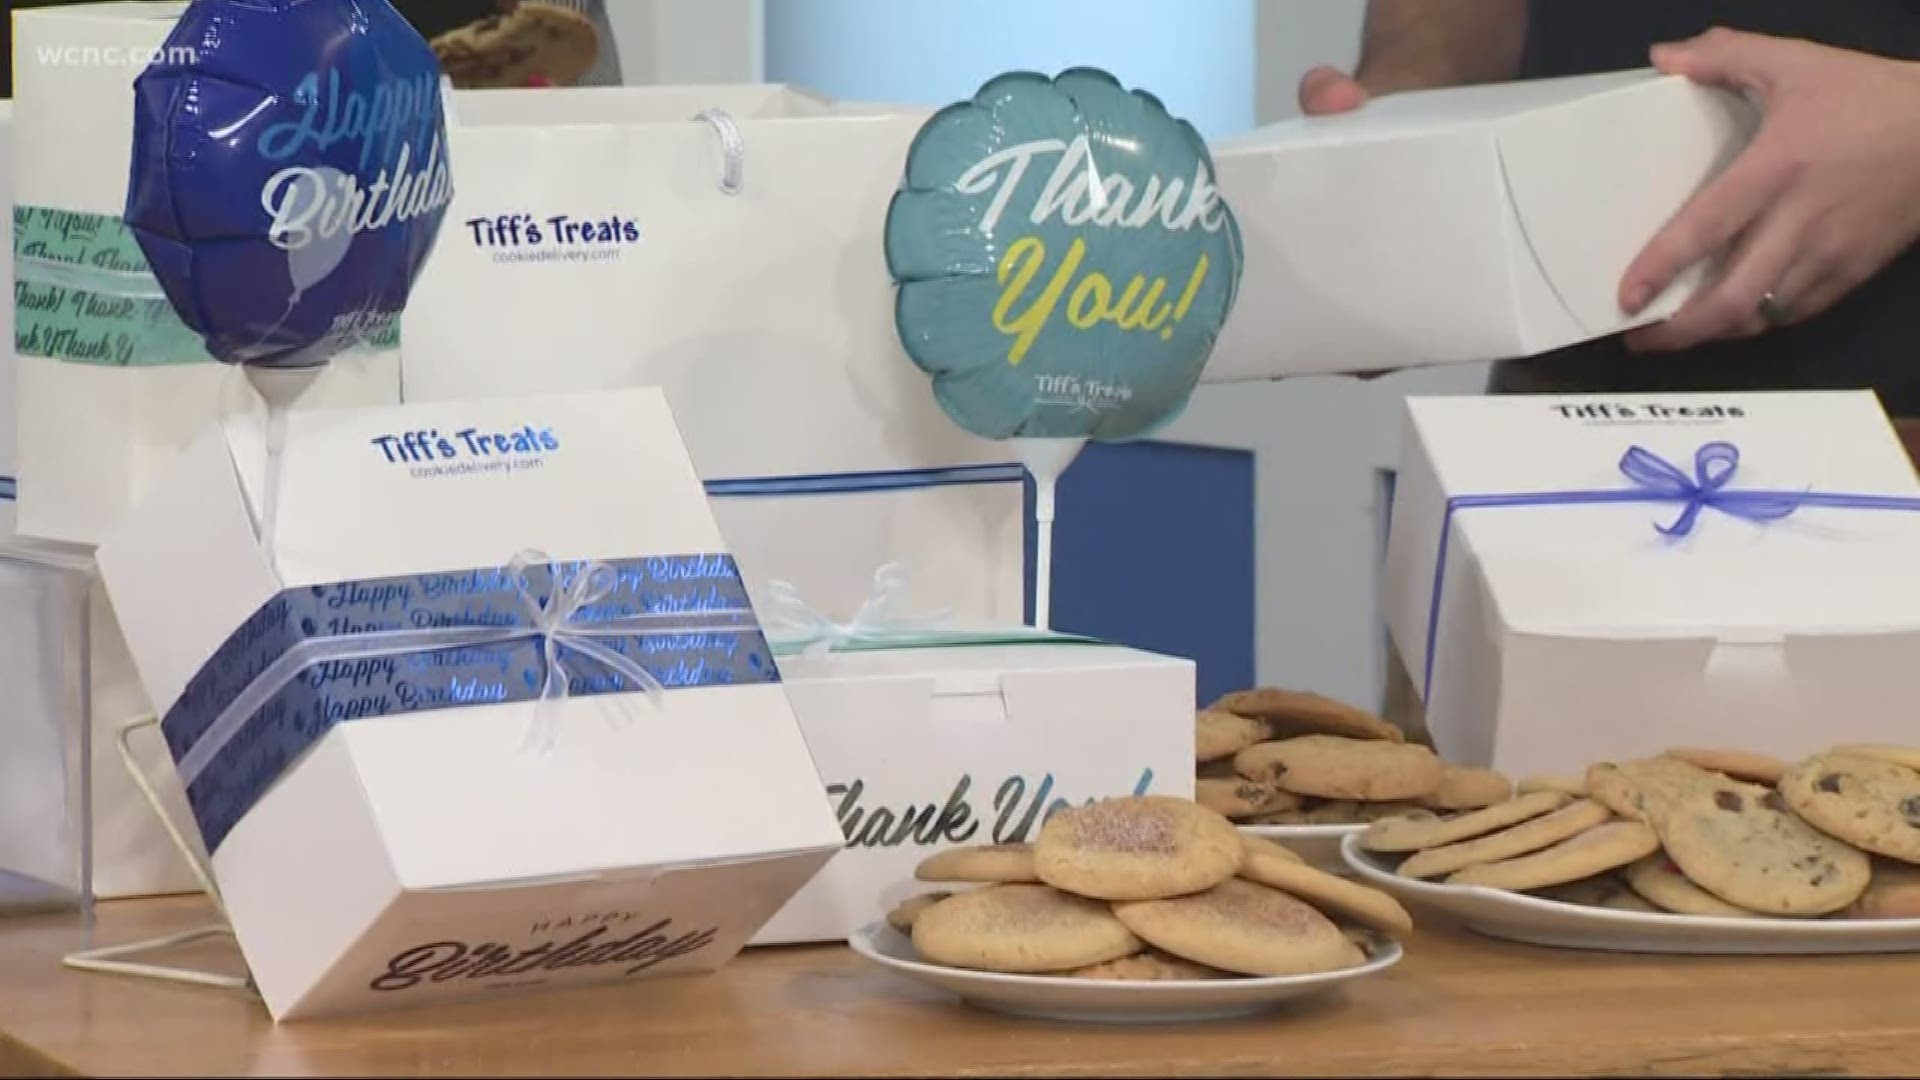 Want to warm someone’s heart or brighten your day? Call Tiff’s Treats pop up in Charlotte for warm, fresh cookies that can be delivered to your door or picked up in store.